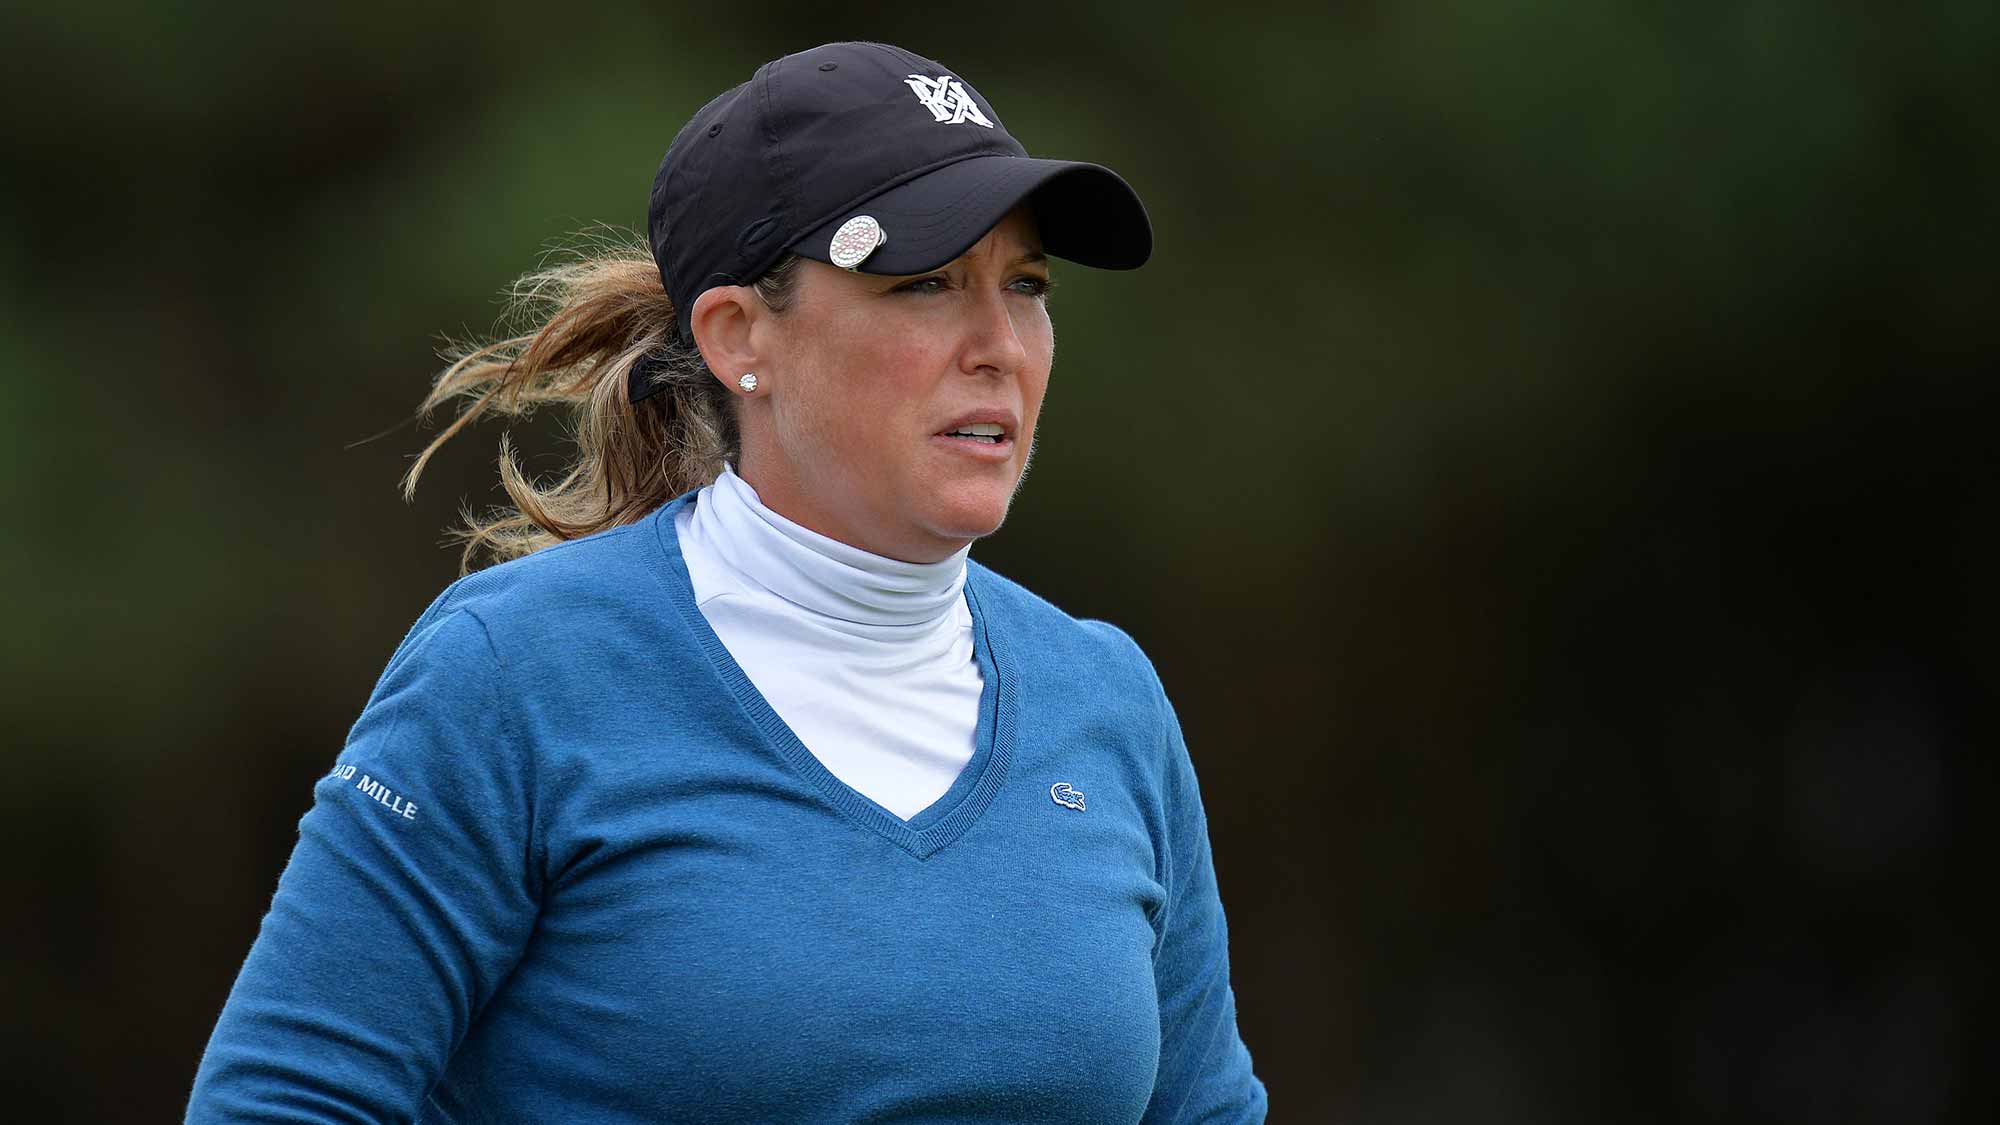 Cristie Kerr of USA looks on at the 12th hole during the second day of the Aberdeen Asset Management Ladies Scottish Open at Dundonald Links Golf Course 